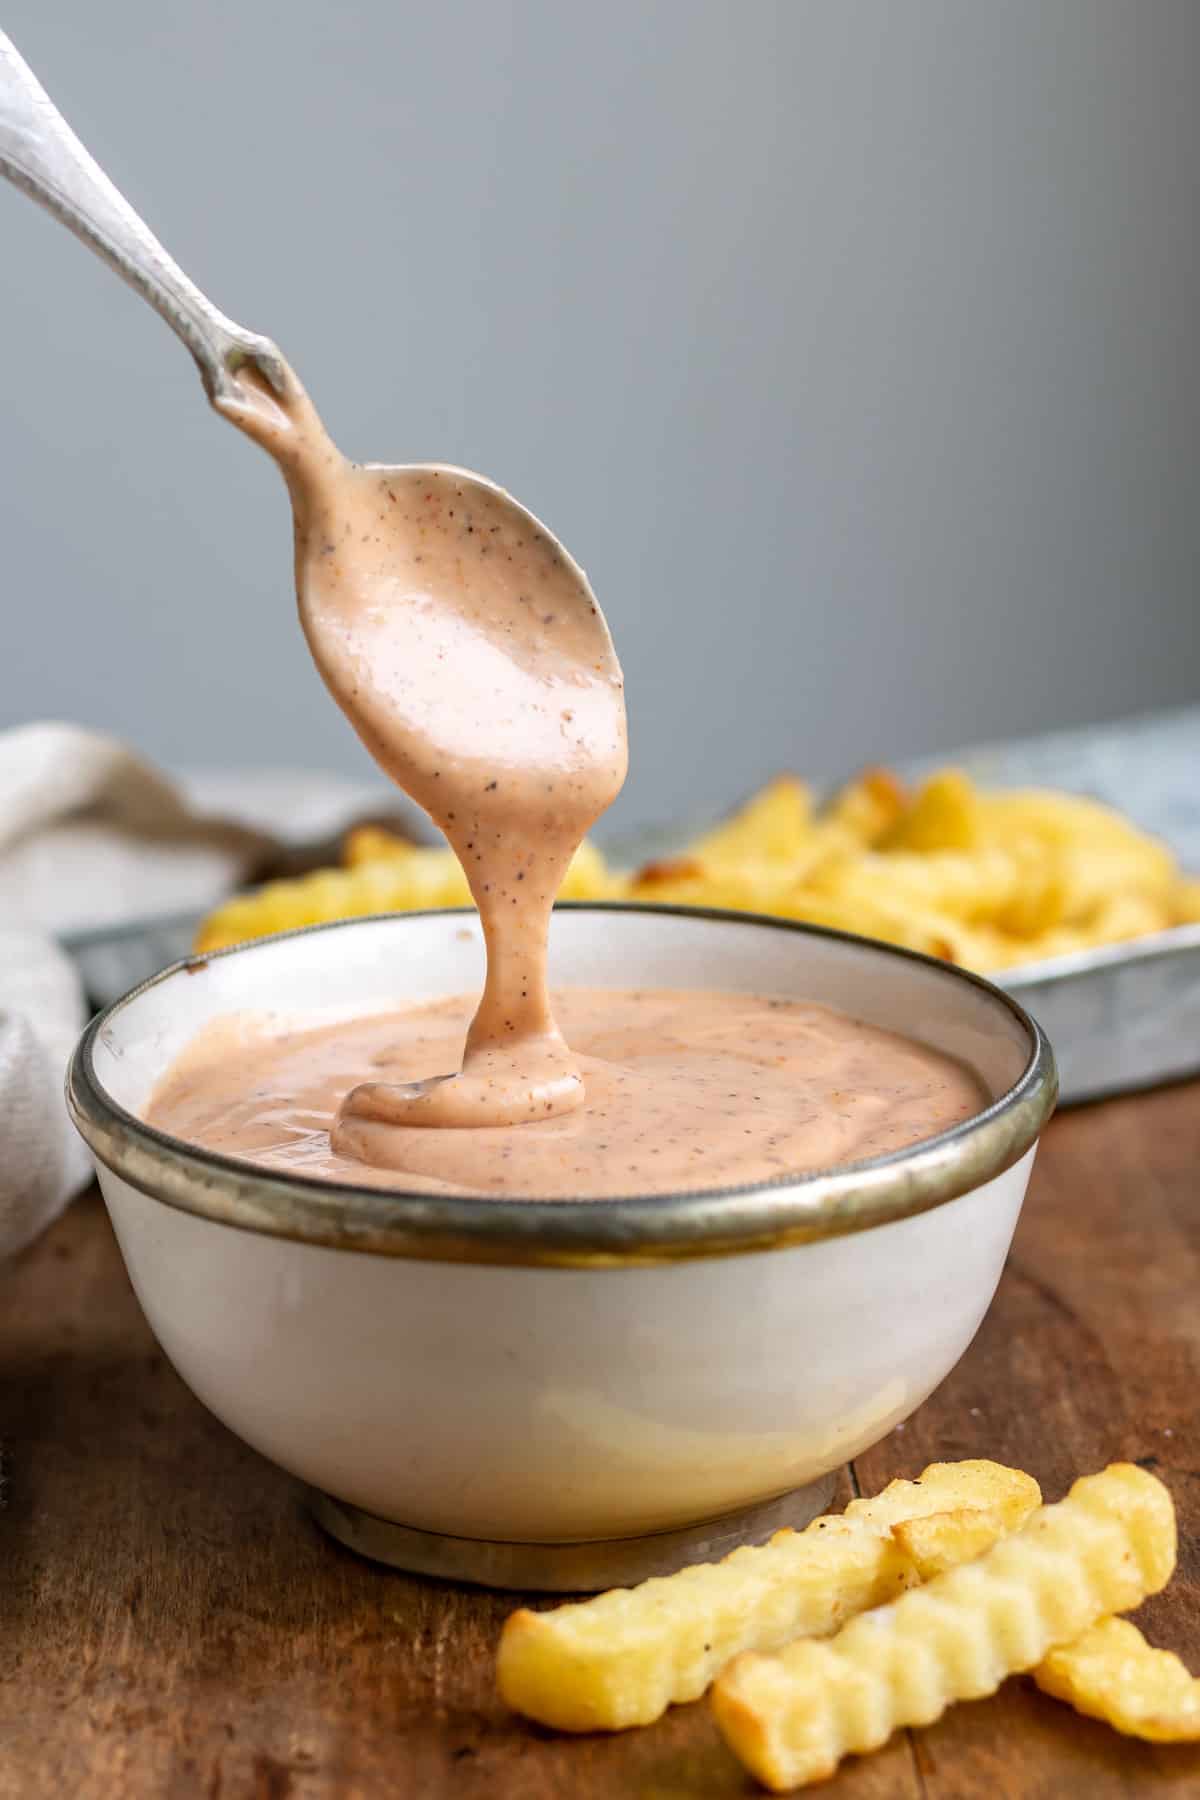 Spoon coming out of a bowl of zax sauce.